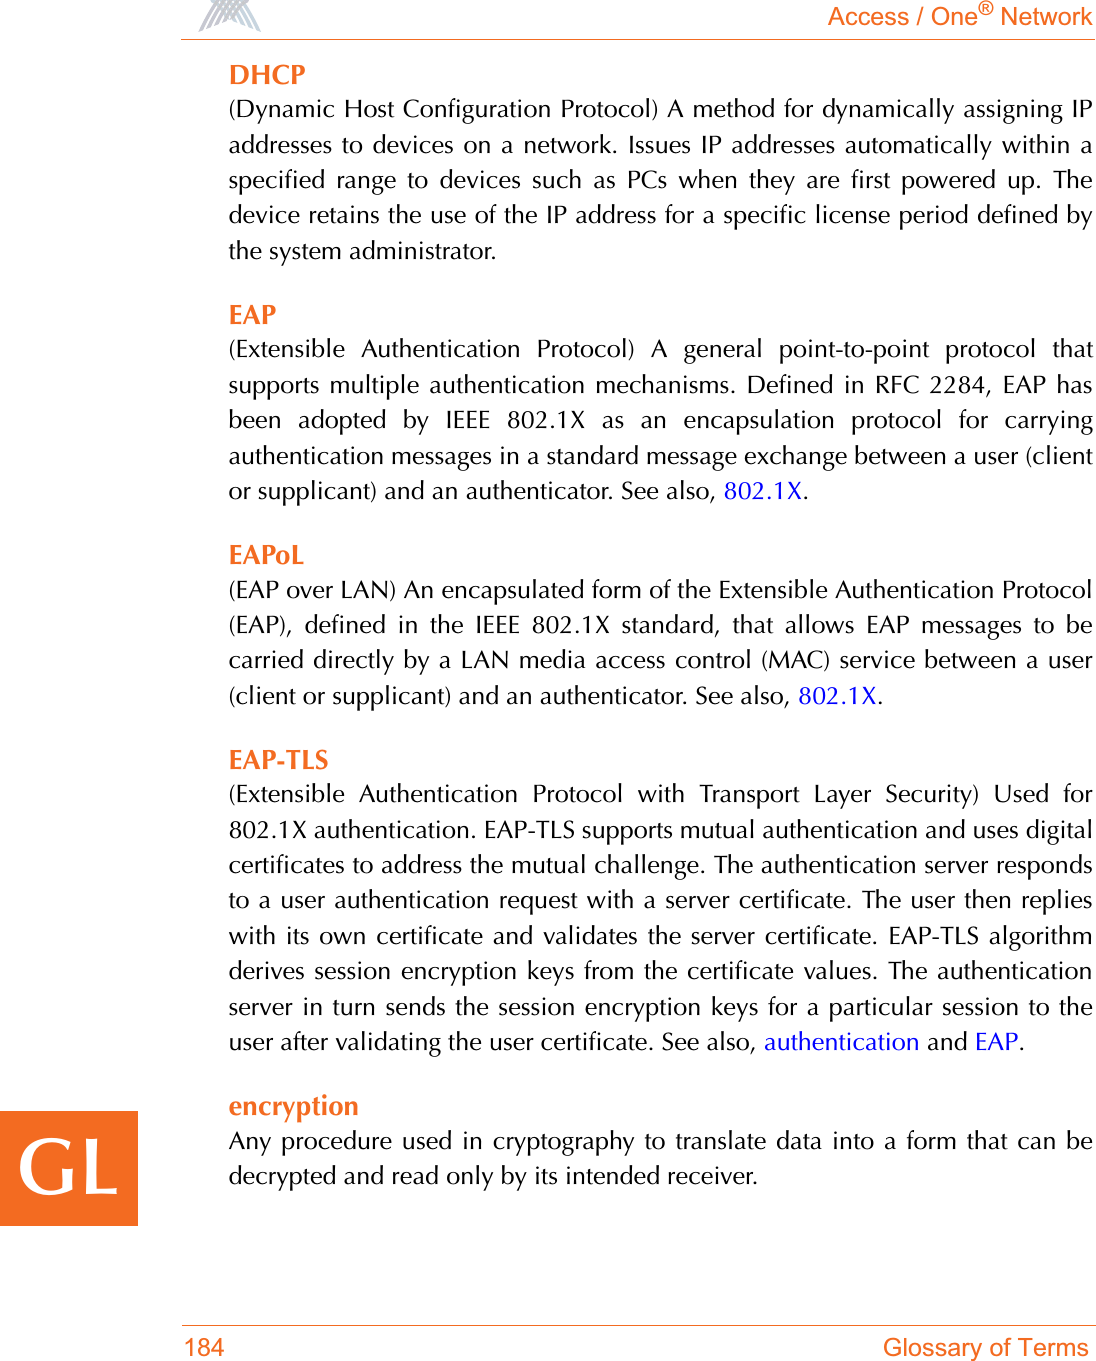 Access / One® Network184 Glossary of TermsGLDHCP(Dynamic Host Configuration Protocol) A method for dynamically assigning IPaddresses to devices on a network. Issues IP addresses automatically within aspecified range to devices such as PCs when they are first powered up. Thedevice retains the use of the IP address for a specific license period defined bythe system administrator.EAP(Extensible Authentication Protocol) A general point-to-point protocol thatsupports multiple authentication mechanisms. Defined in RFC 2284, EAP hasbeen adopted by IEEE 802.1X as an encapsulation protocol for carryingauthentication messages in a standard message exchange between a user (clientor supplicant) and an authenticator. See also, 802.1X.EAPoL(EAP over LAN) An encapsulated form of the Extensible Authentication Protocol(EAP), defined in the IEEE 802.1X standard, that allows EAP messages to becarried directly by a LAN media access control (MAC) service between a user(client or supplicant) and an authenticator. See also, 802.1X.EAP-TLS(Extensible Authentication Protocol with Transport Layer Security) Used for802.1X authentication. EAP-TLS supports mutual authentication and uses digitalcertificates to address the mutual challenge. The authentication server respondsto a user authentication request with a server certificate. The user then replieswith its own certificate and validates the server certificate. EAP-TLS algorithmderives session encryption keys from the certificate values. The authenticationserver in turn sends the session encryption keys for a particular session to theuser after validating the user certificate. See also, authentication and EAP.encryptionAny procedure used in cryptography to translate data into a form that can bedecrypted and read only by its intended receiver. 